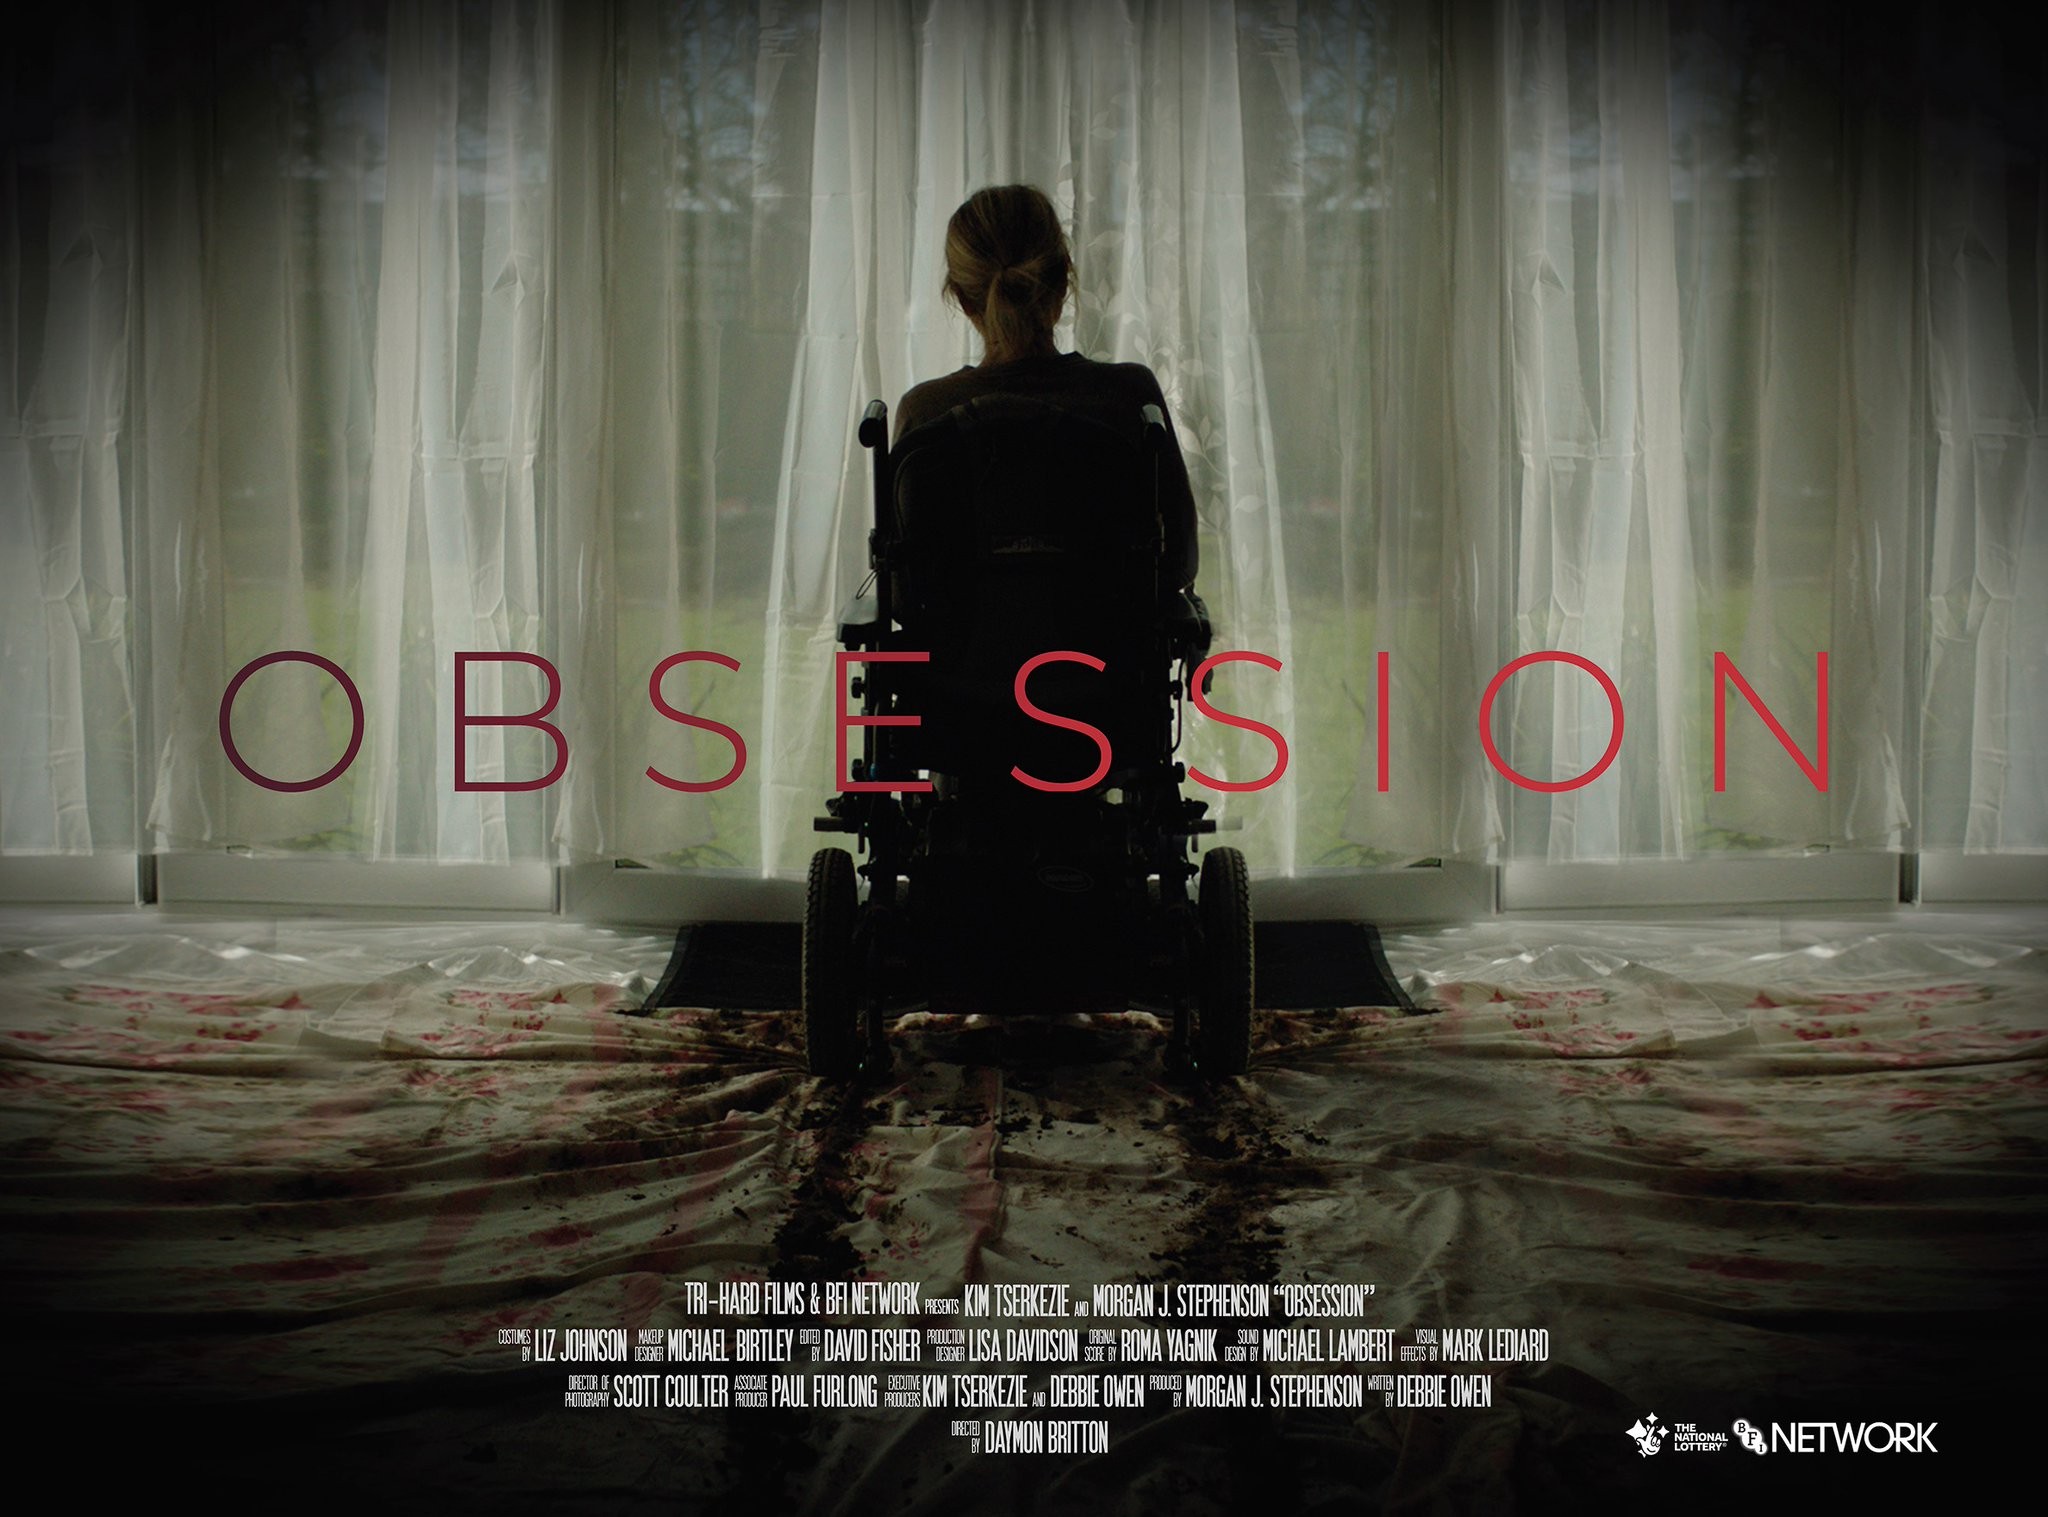 Mega Sized Movie Poster Image for Obsession